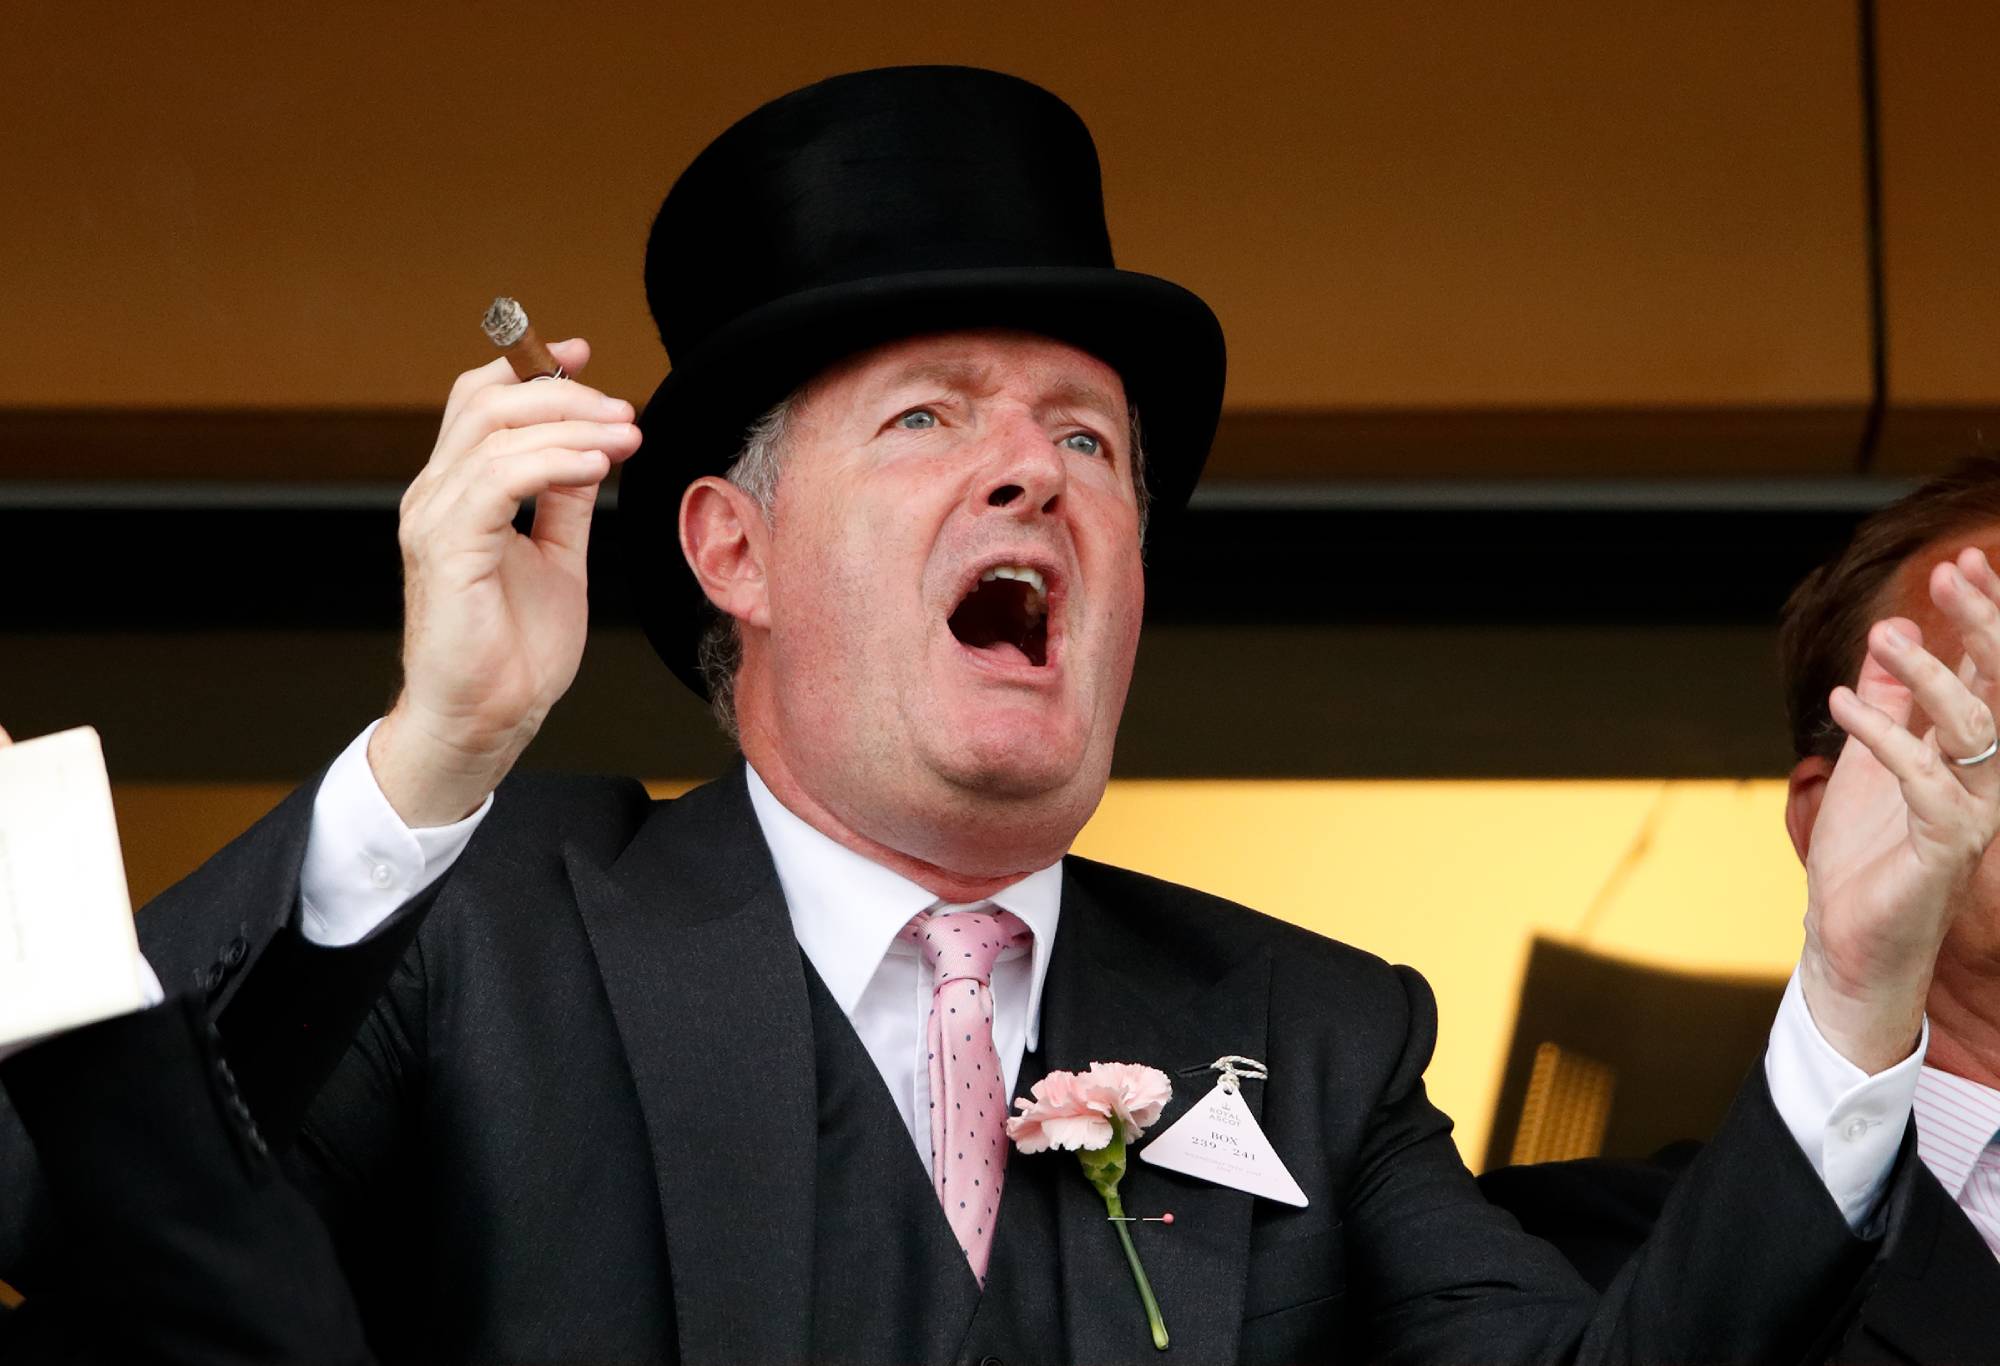 ASCOT, UNITED KINGDOM - JUNE 19: (EMBARGOED FOR PUBLICATION IN UK NEWSPAPERS UNTIL 24 HOURS AFTER CREATE DATE AND TIME) Piers Morgan smokes a cigar whilst watching the racing on day two of Royal Ascot at Ascot Racecourse on June 19, 2019 in Ascot, England. (Photo by Max Mumby/Indigo/Getty Images)